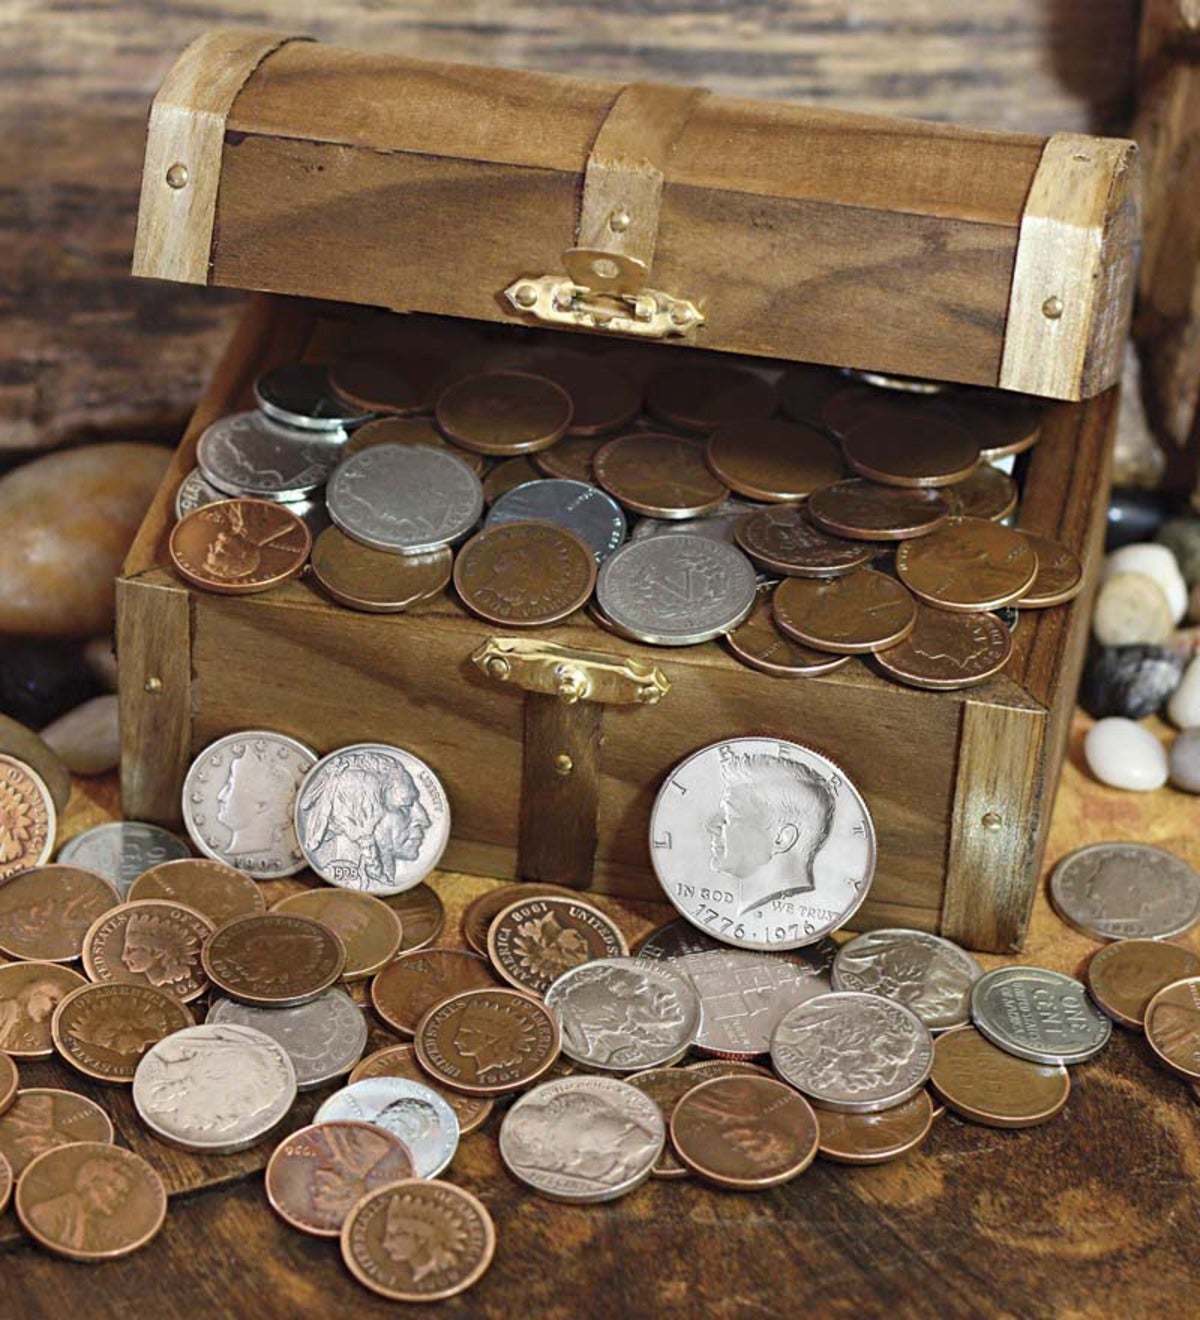 Historic Treasure Chest of Old & Rare Coins